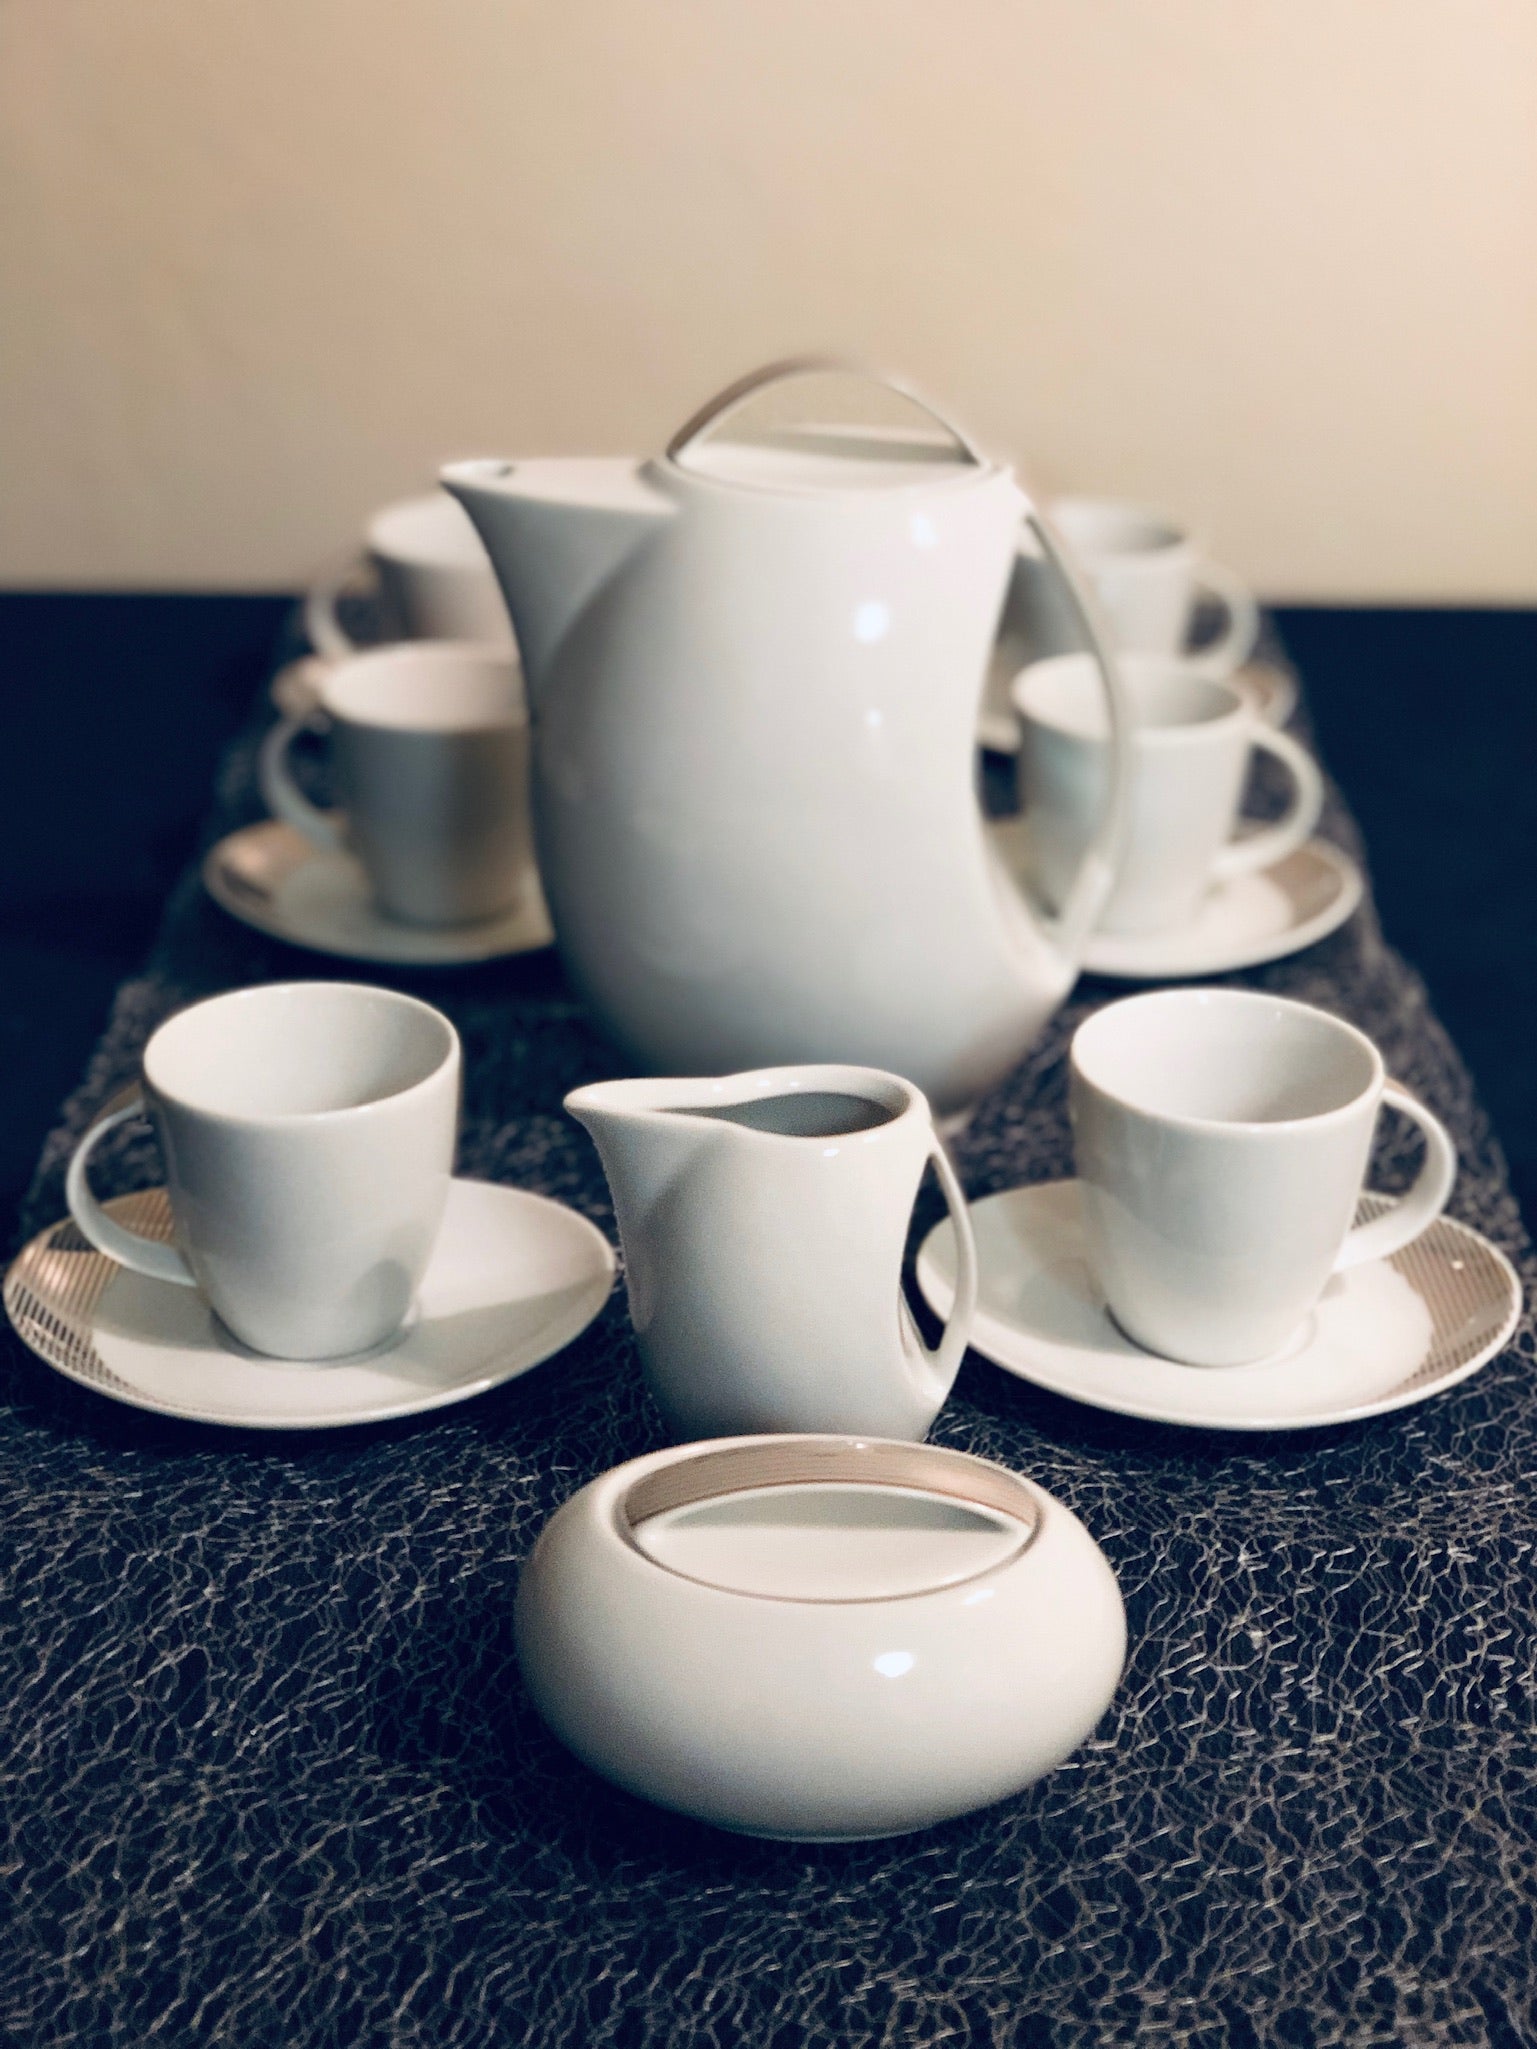 Coffee set made out of high-quality porcelain